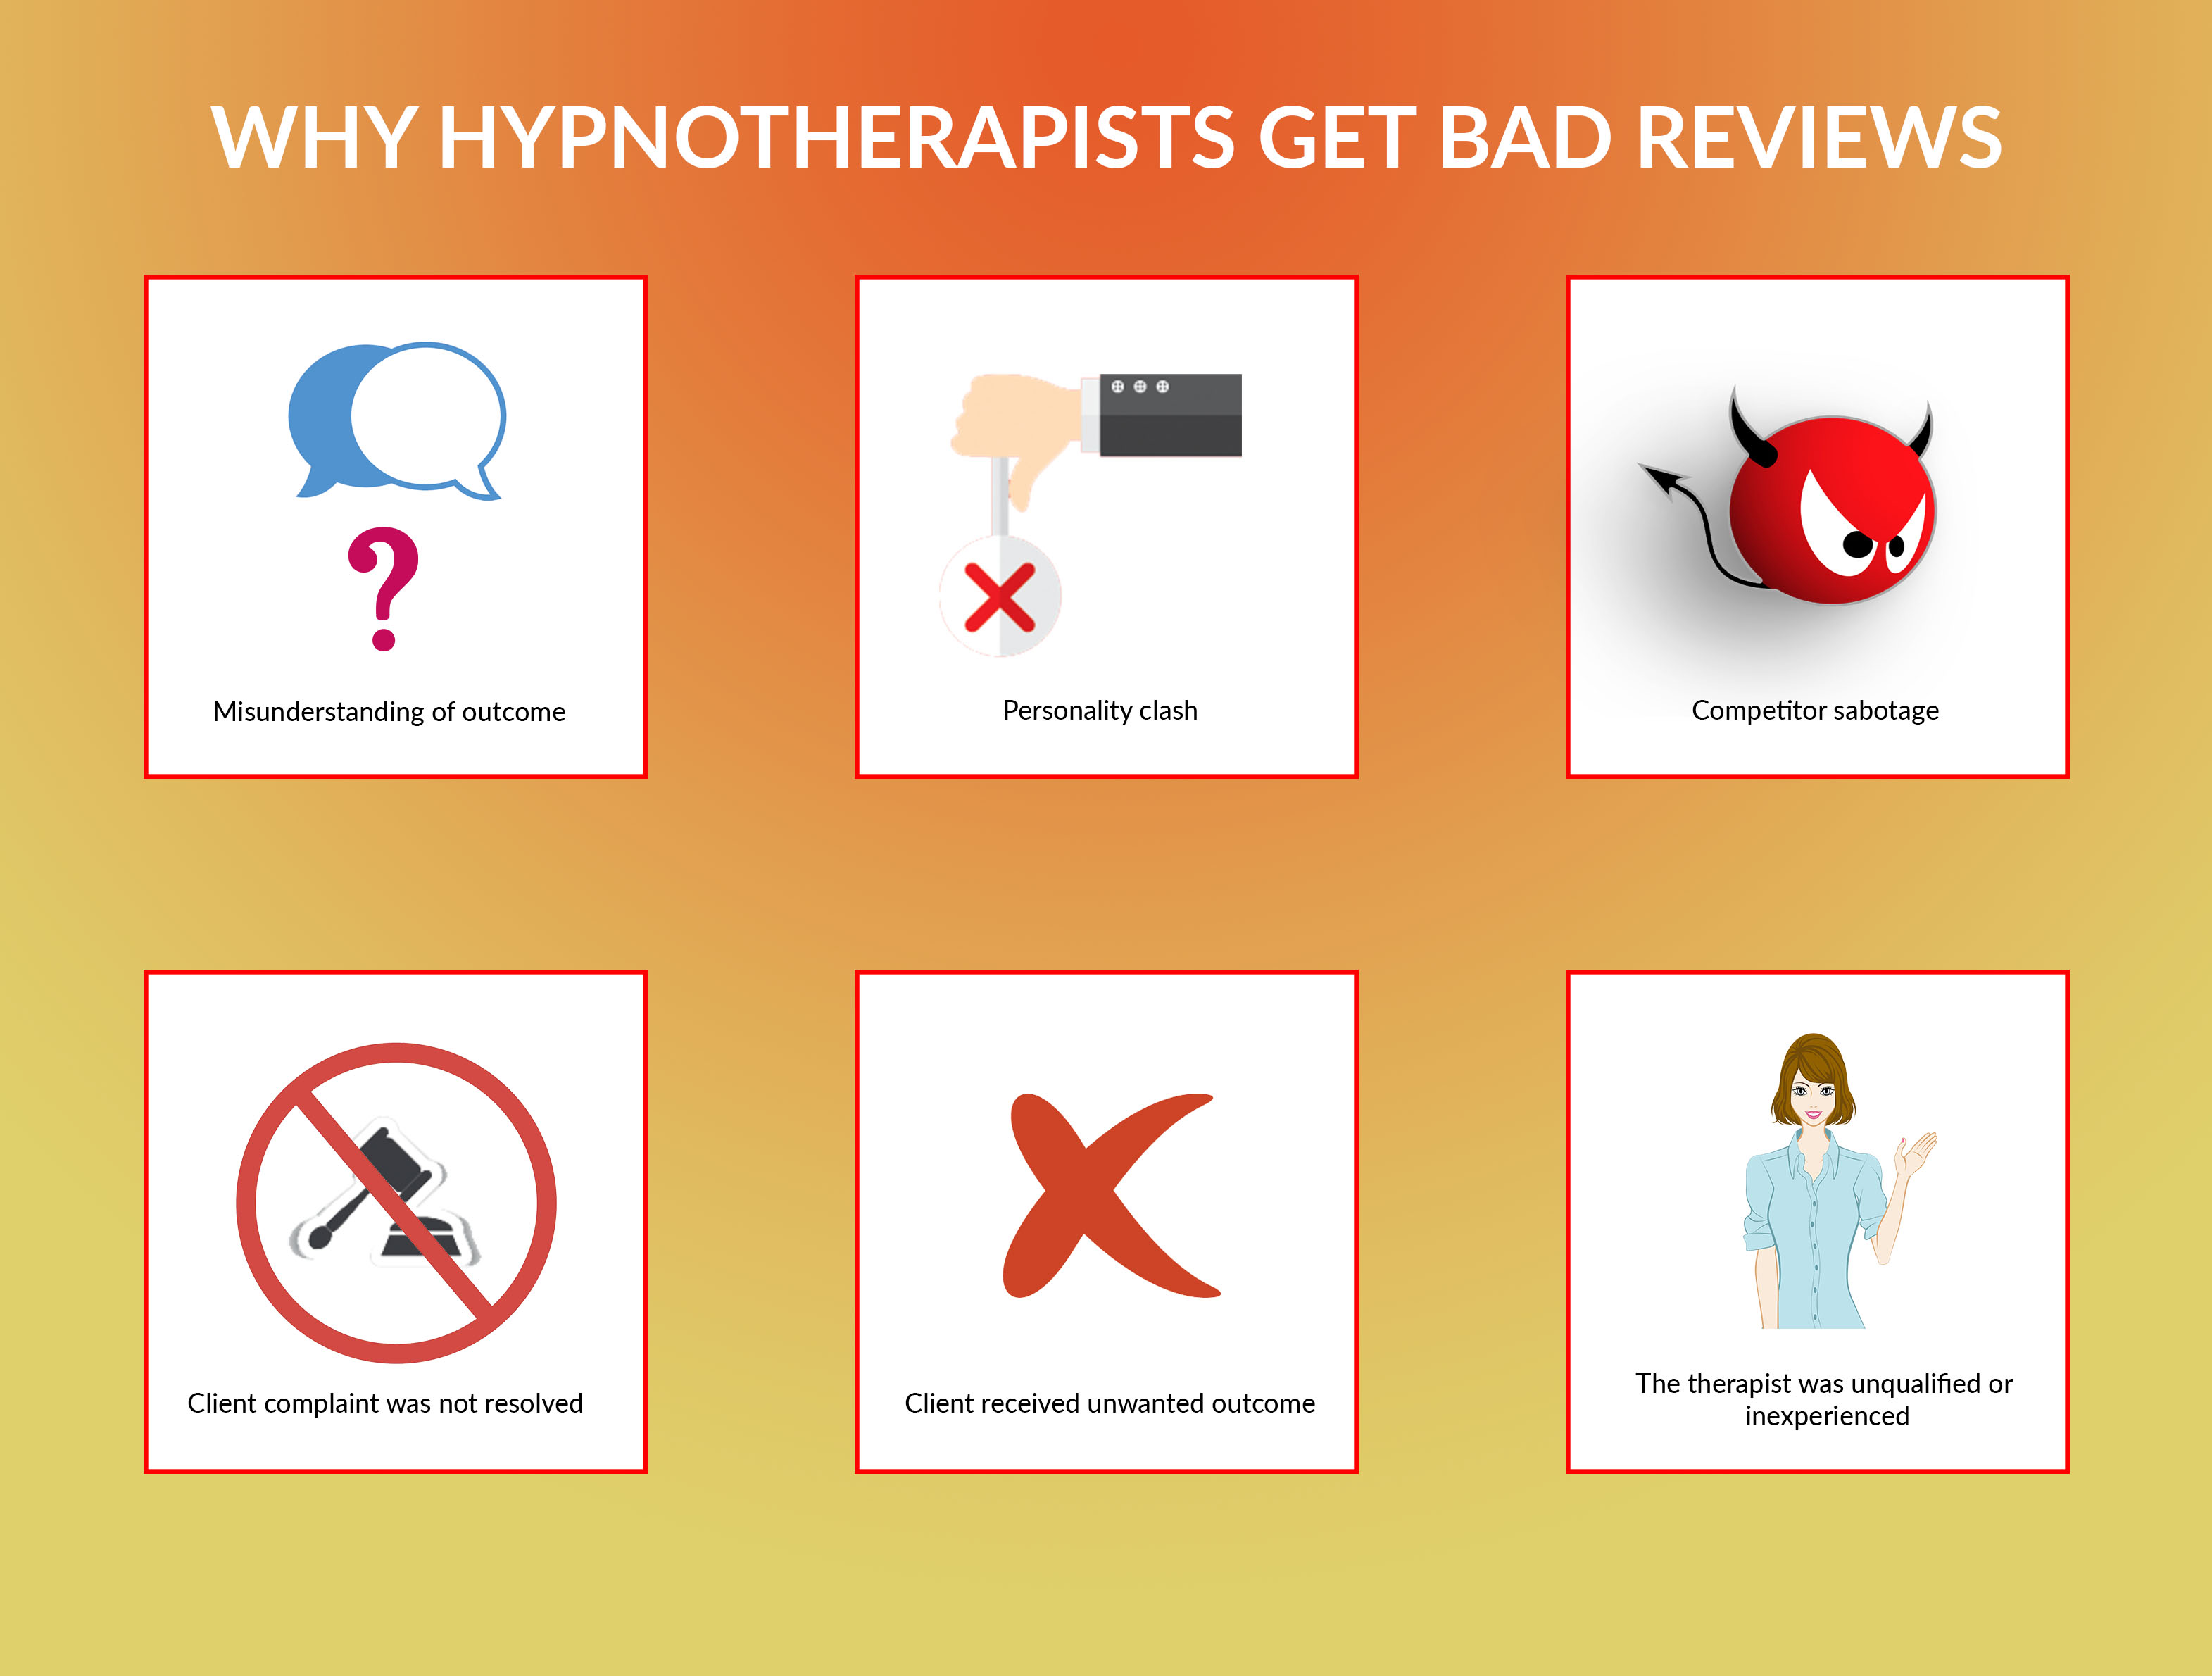 Why people give bad reviews to hypnotherapists